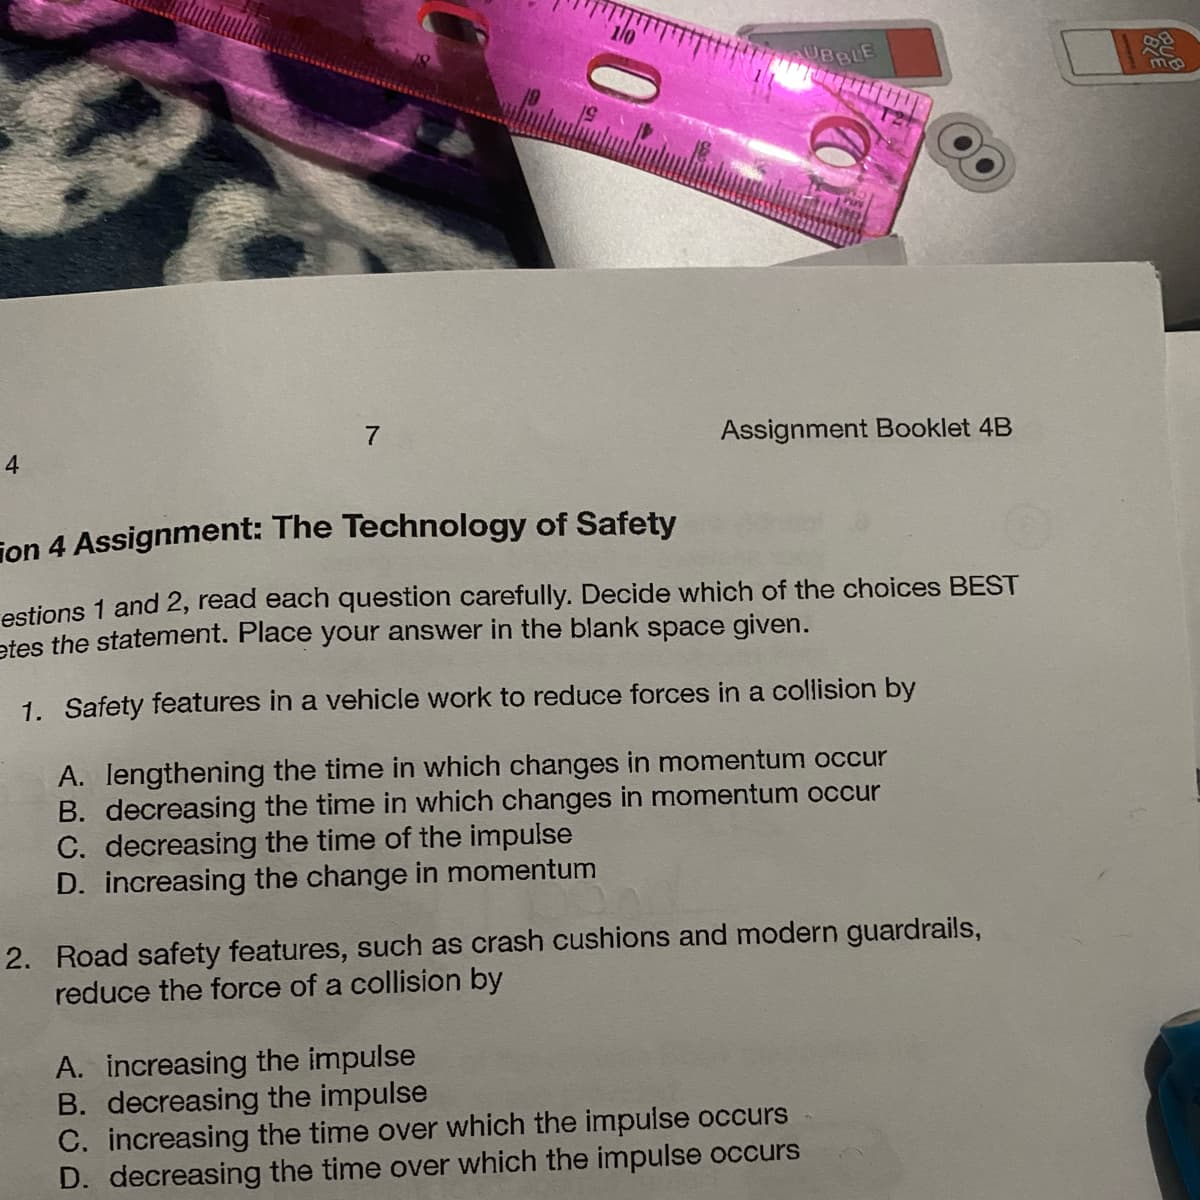 4
7
19
BBLE
Assignment Booklet 4B
on 4 Assignment: The Technology of Safety
estions 1 and 2, read each question carefully. Decide which of the choices BEST
etes the statement. Place your answer in the blank space given.
1. Safety features in a vehicle work to reduce forces in a collision by
A. lengthening the time in which changes in momentum occur
B. decreasing the time in which changes in momentum occur
C. decreasing the time of the impulse
D. increasing the change in momentum
2. Road safety features, such as crash cushions and modern guardrails,
reduce the force of a collision by
A. increasing the impulse
B. decreasing the impulse
C. increasing the time over which the impulse occurs
D. decreasing the time over which the impulse occurs